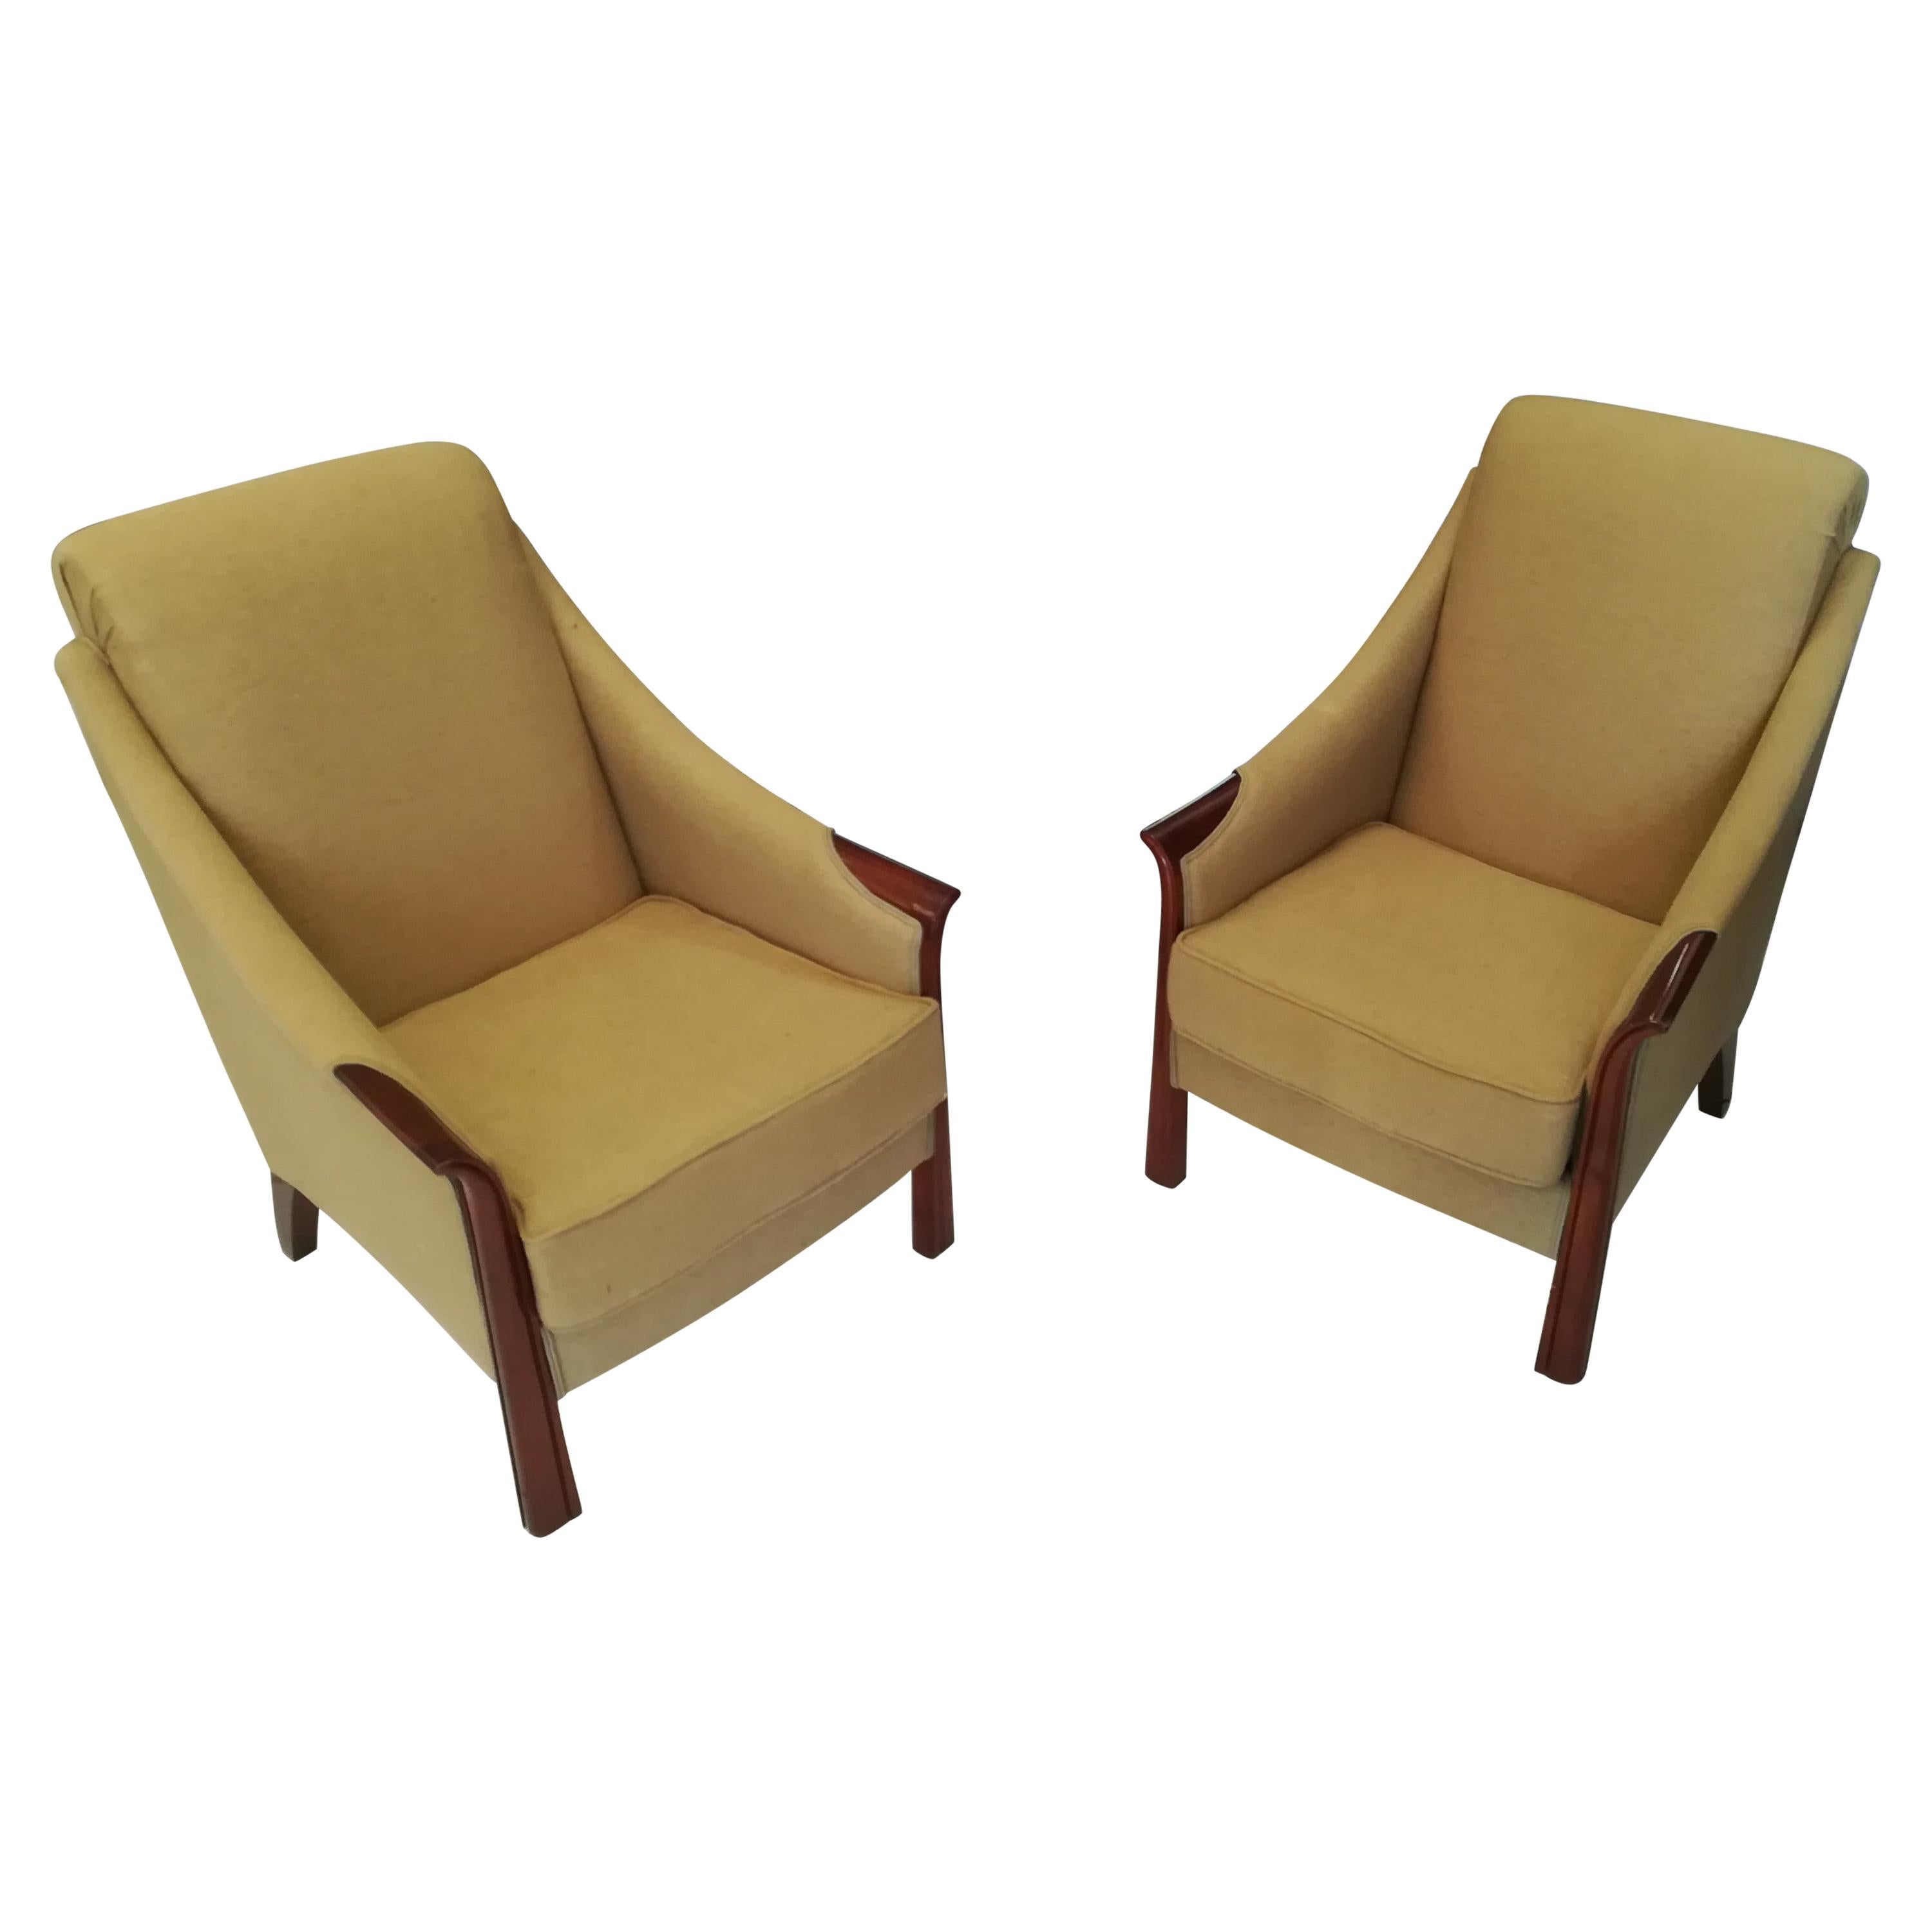 Pair of Art Deco Armchairs in the style of Pierre Chareau, circa 1930